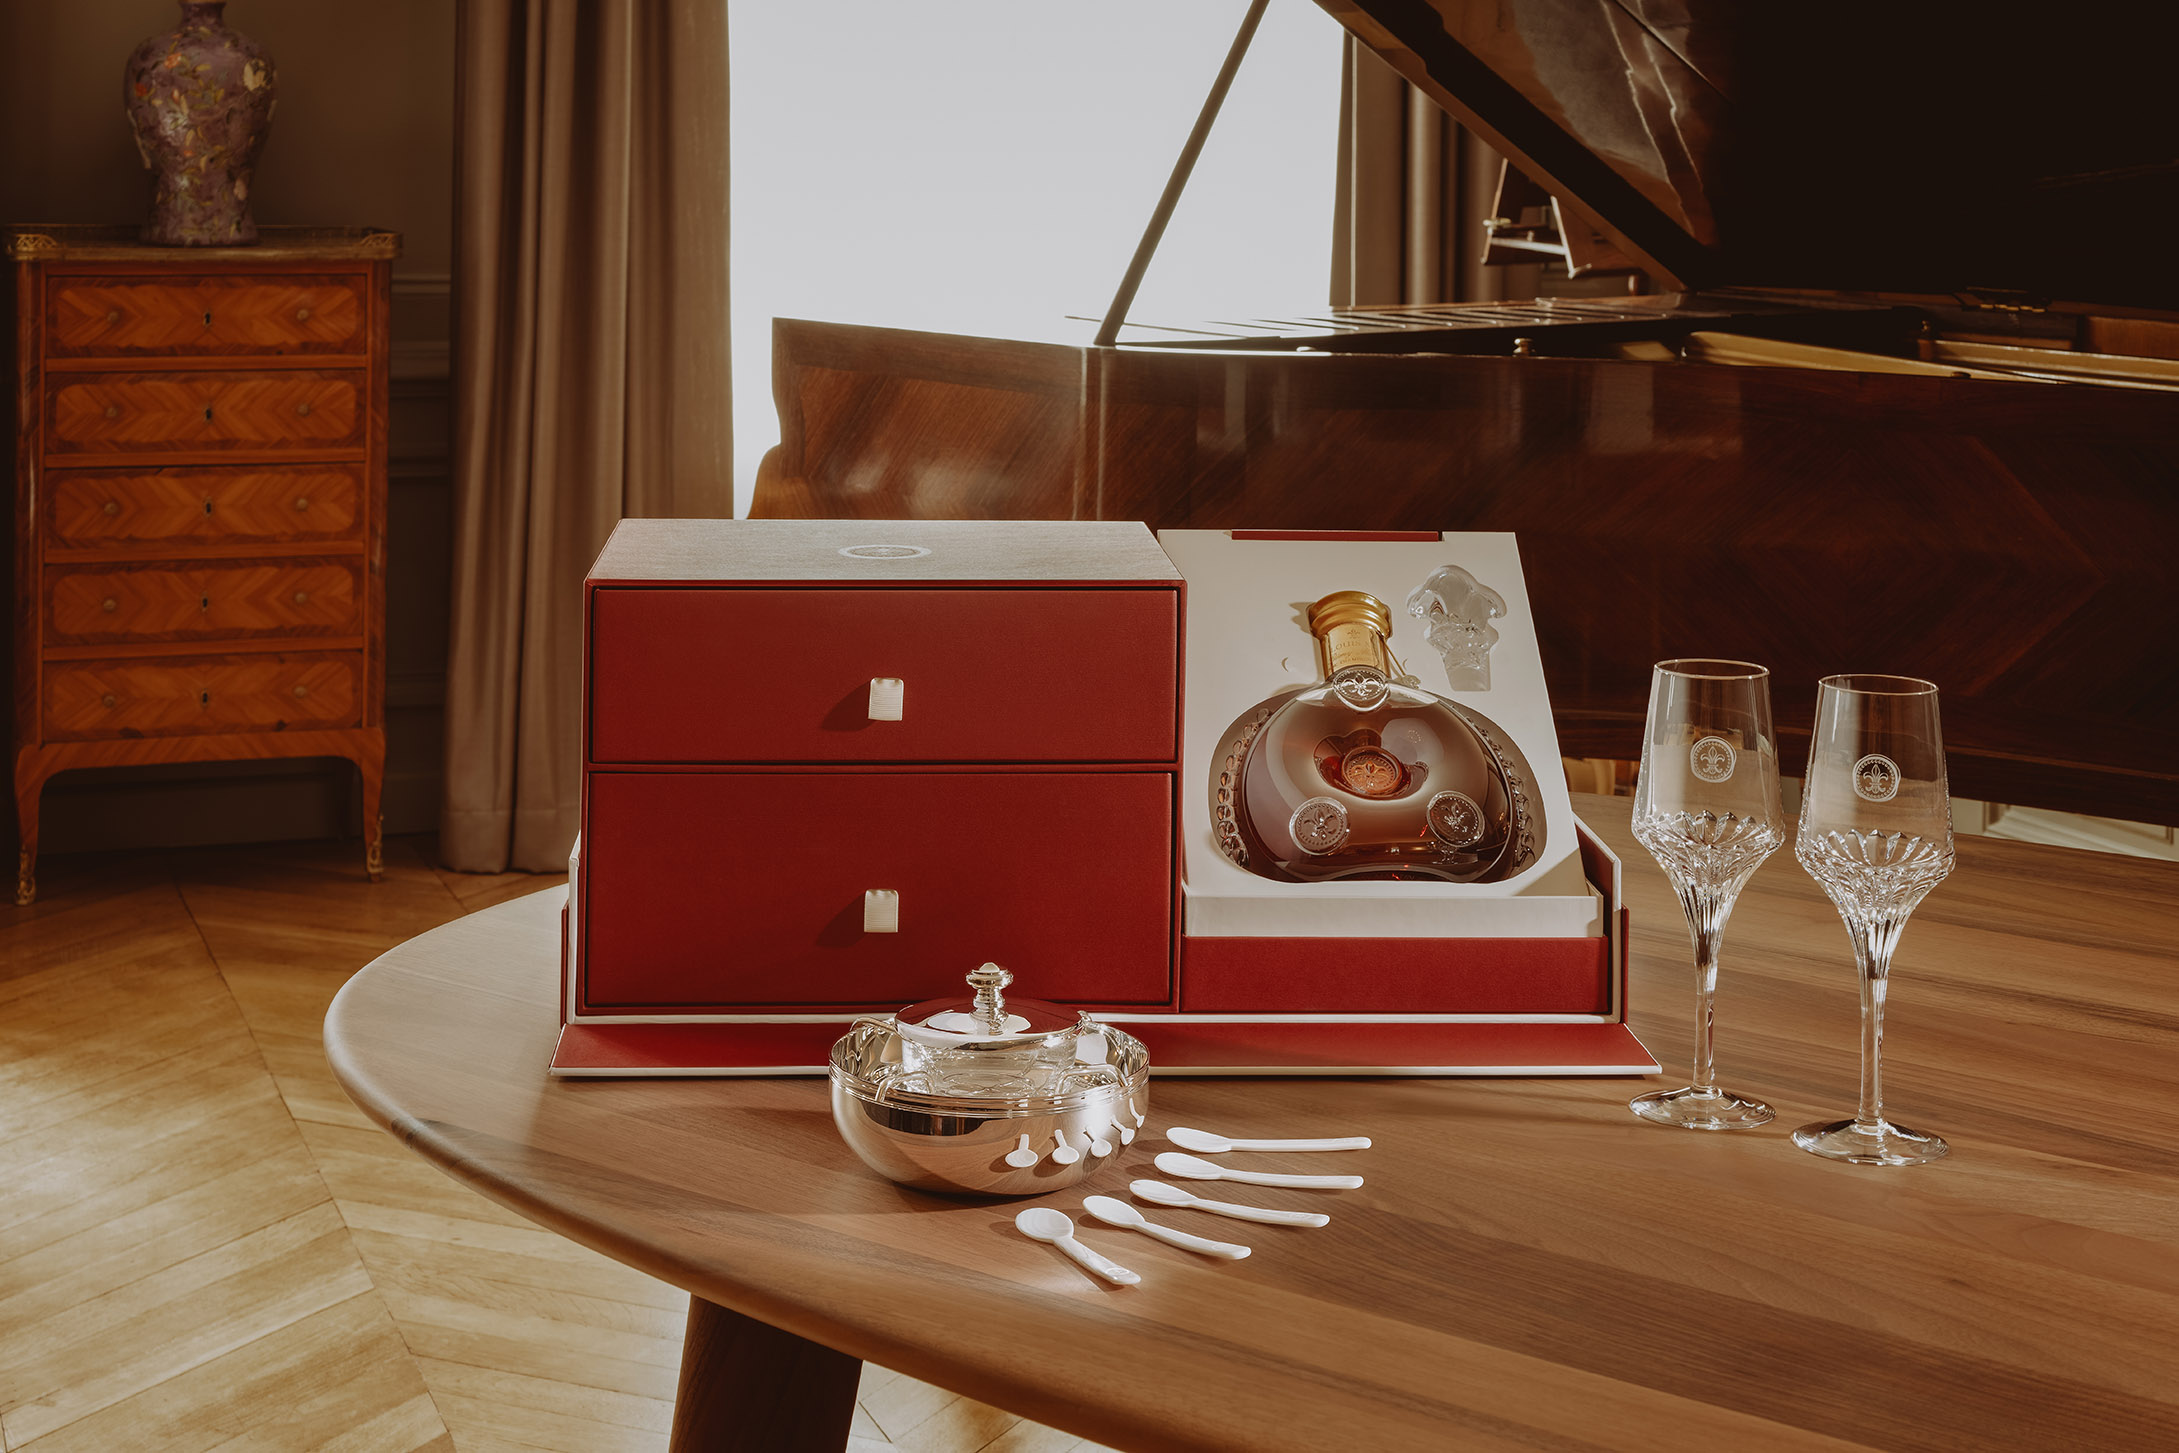 LOUIS XIII COGNAC PRESENTS 'THE GIFT COLLECTION